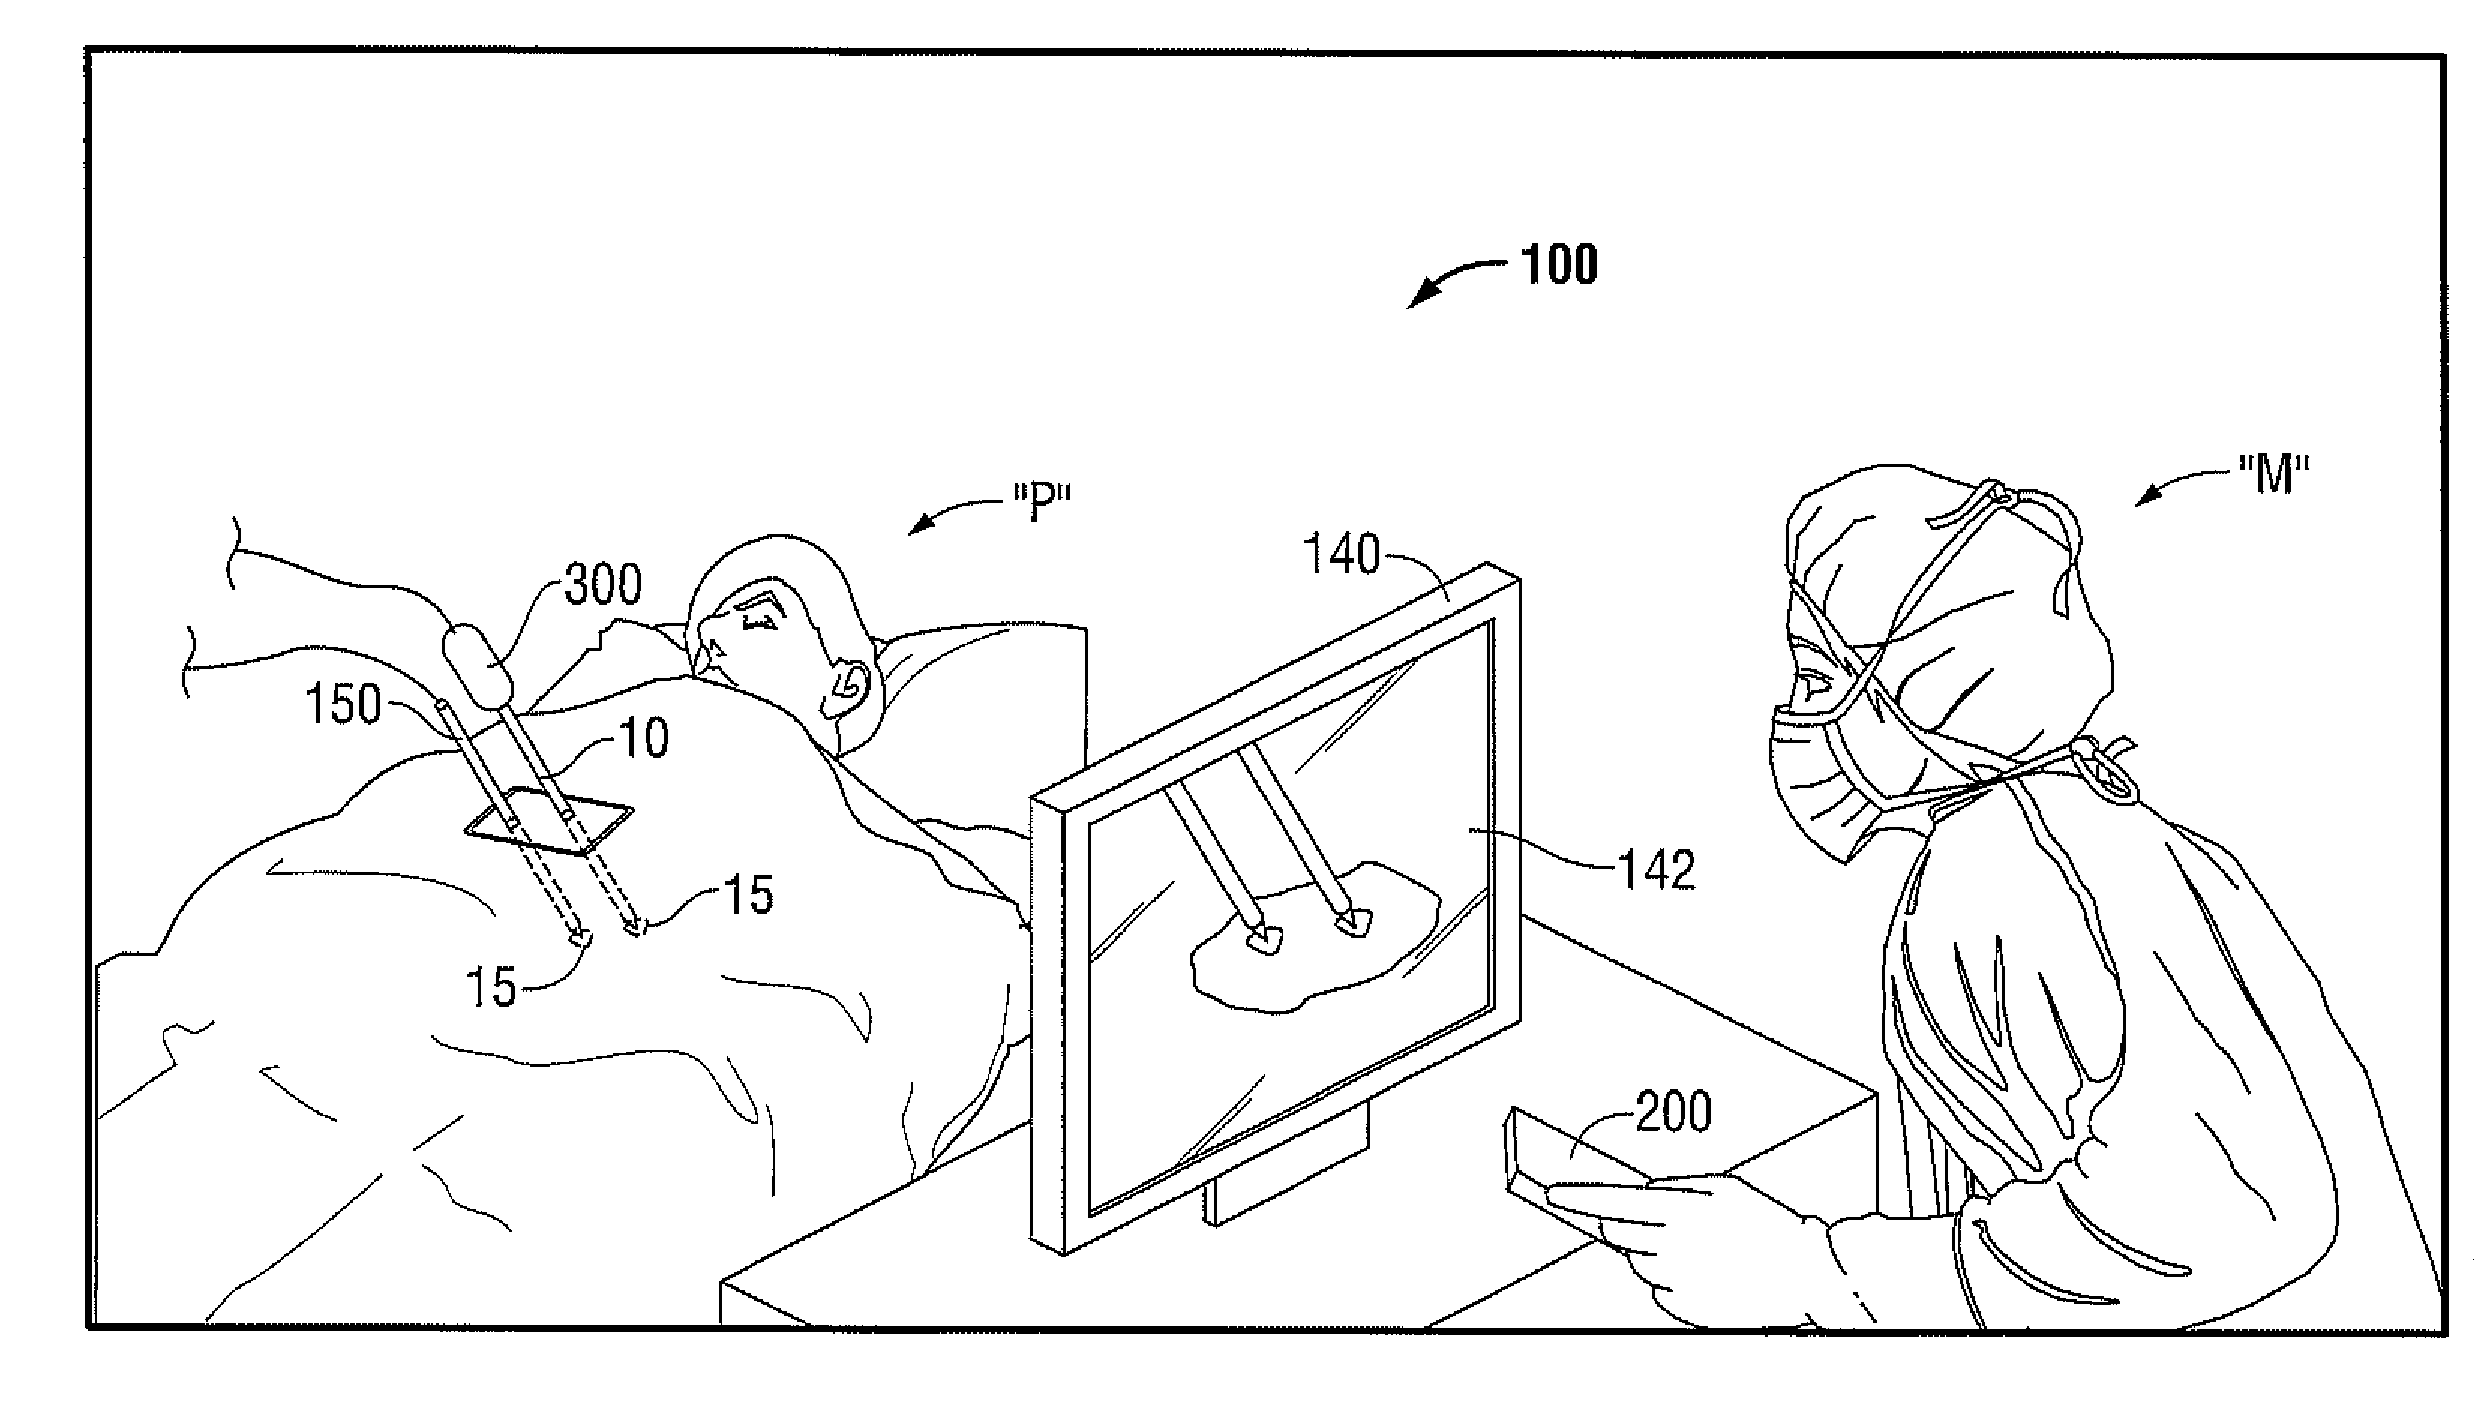 Apparatus and Method for Using a Remote Control System in Surgical Procedures